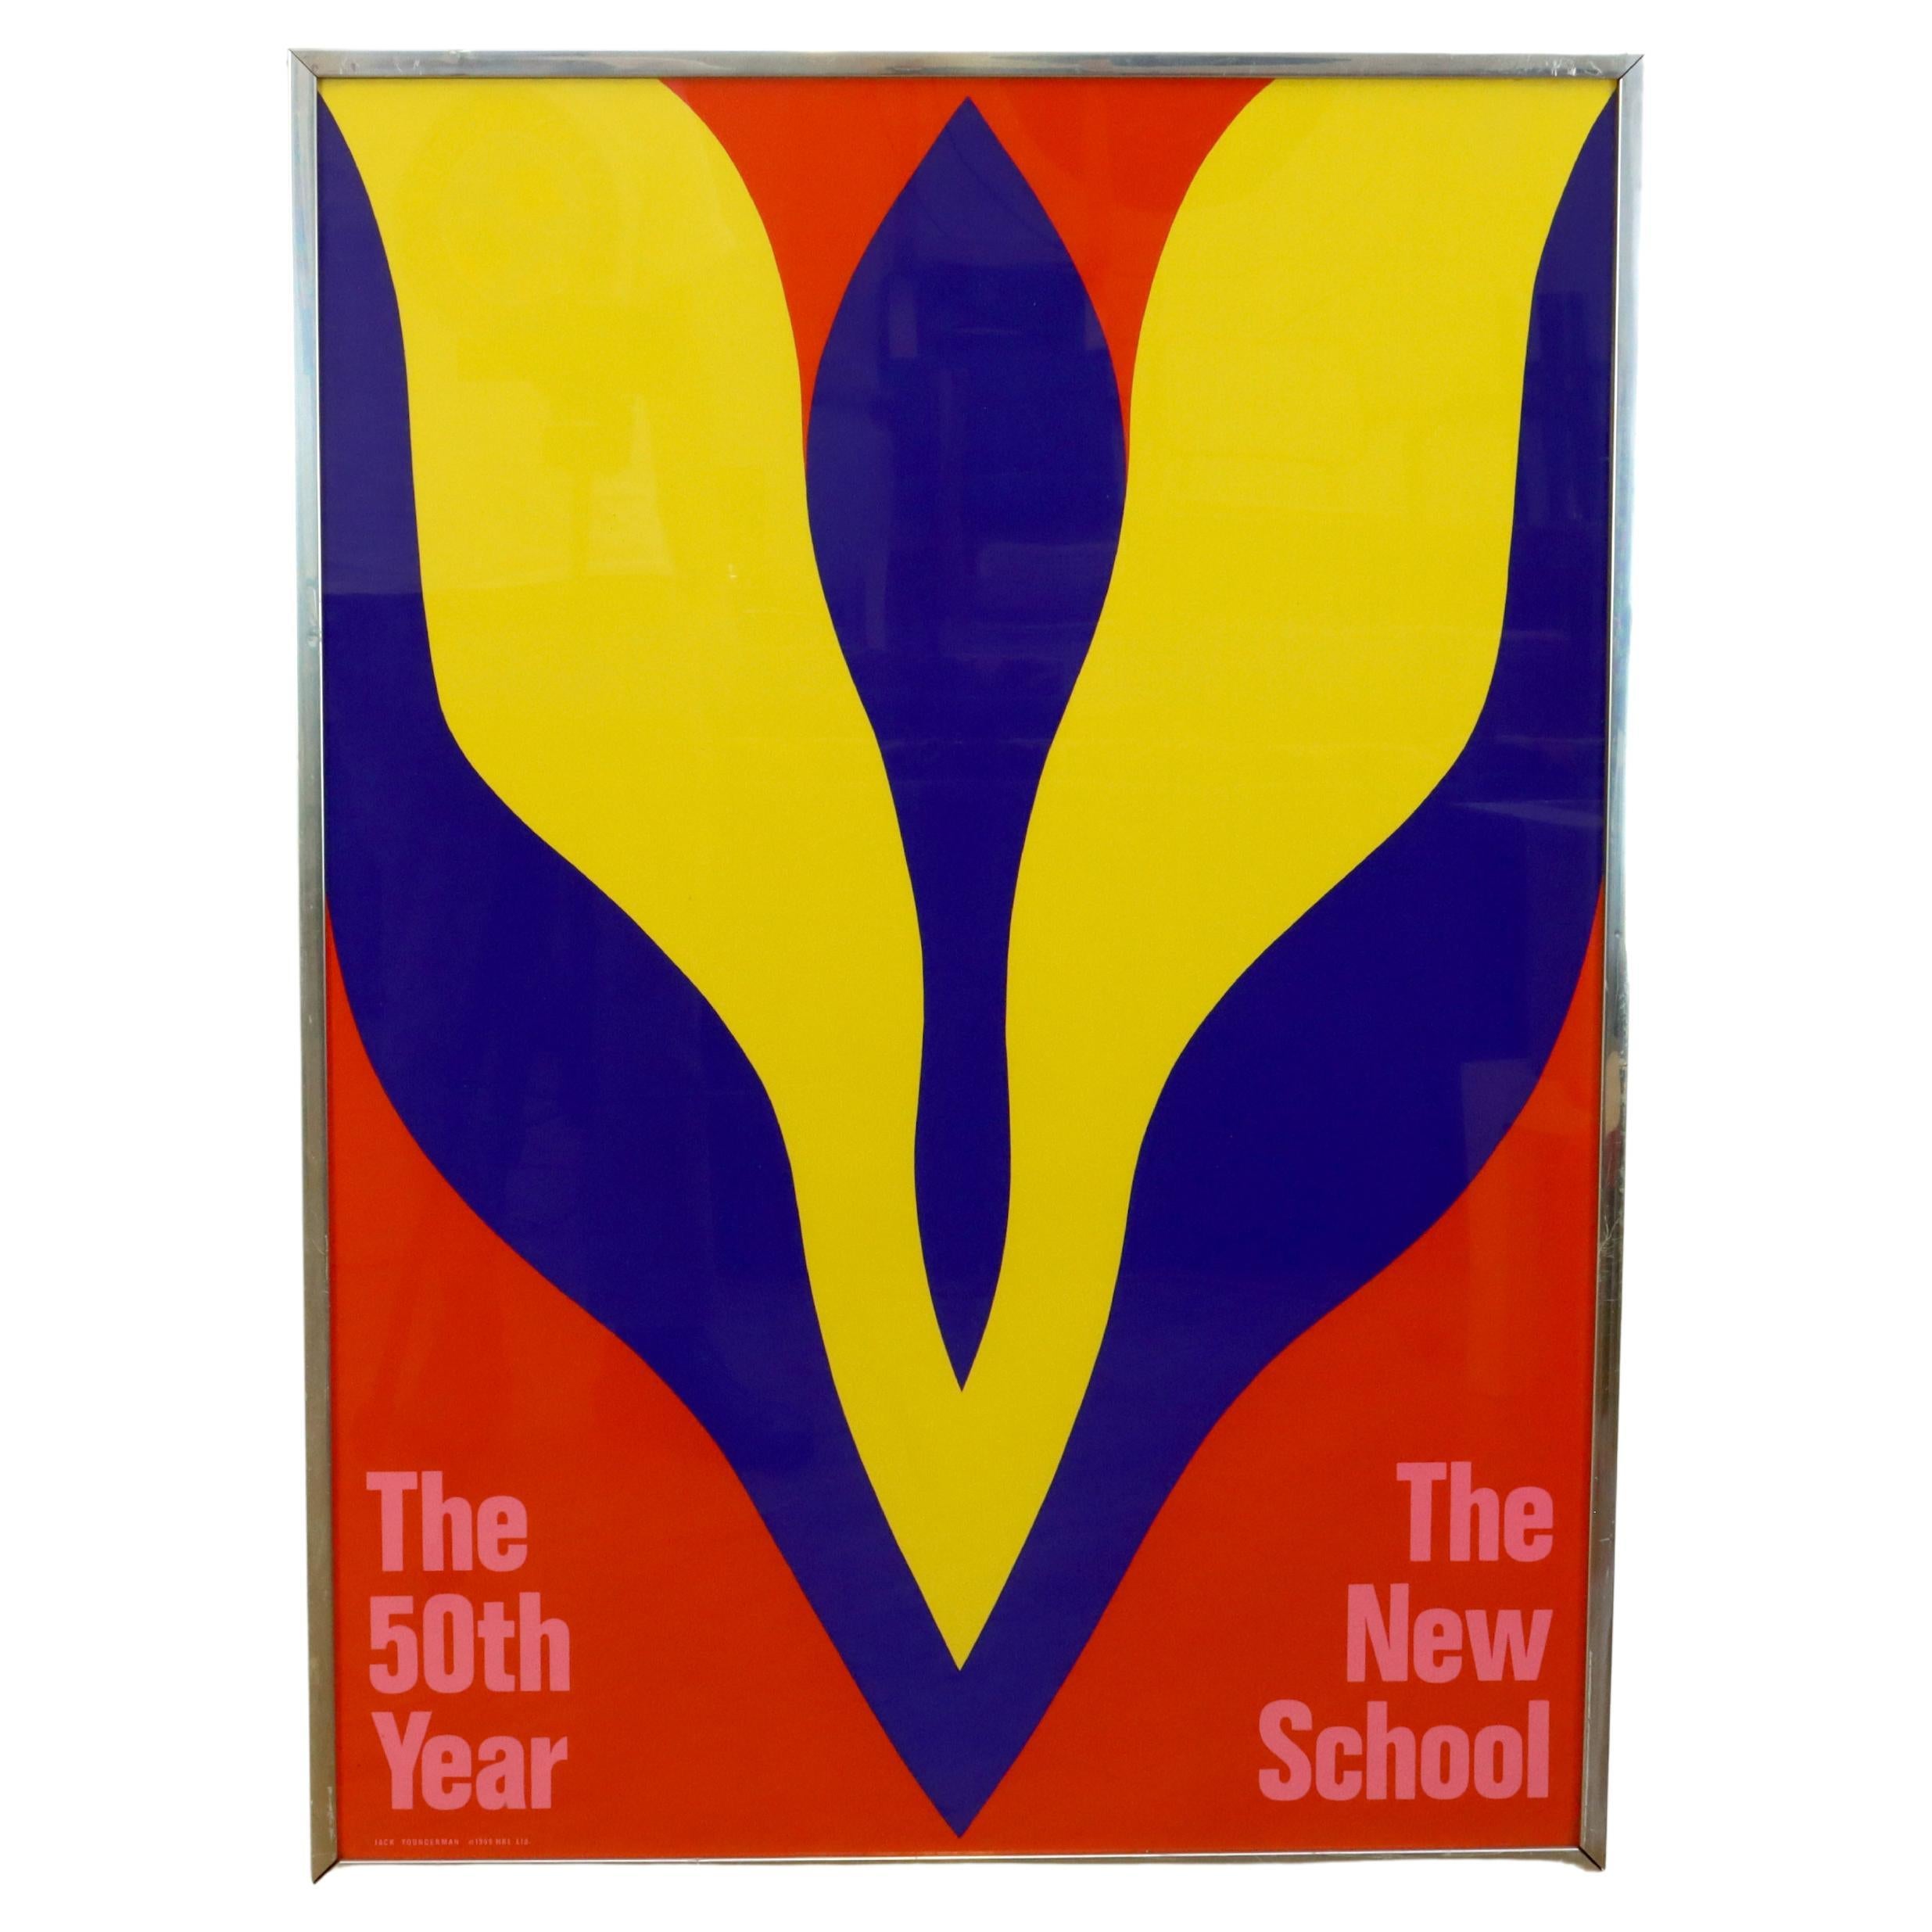 1969 Jack Youngerman Poster for The New School